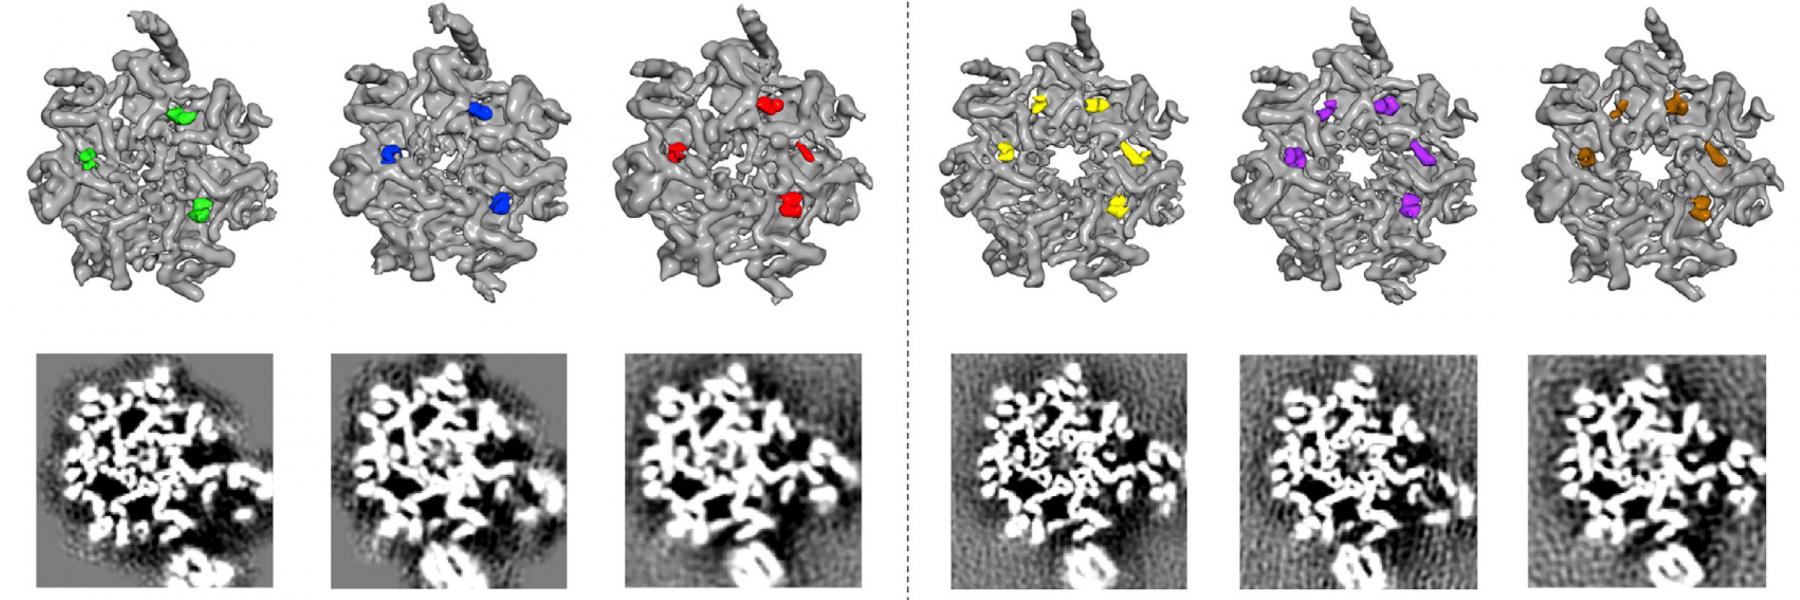 Gating of the proteasome core particle by ATPase tails